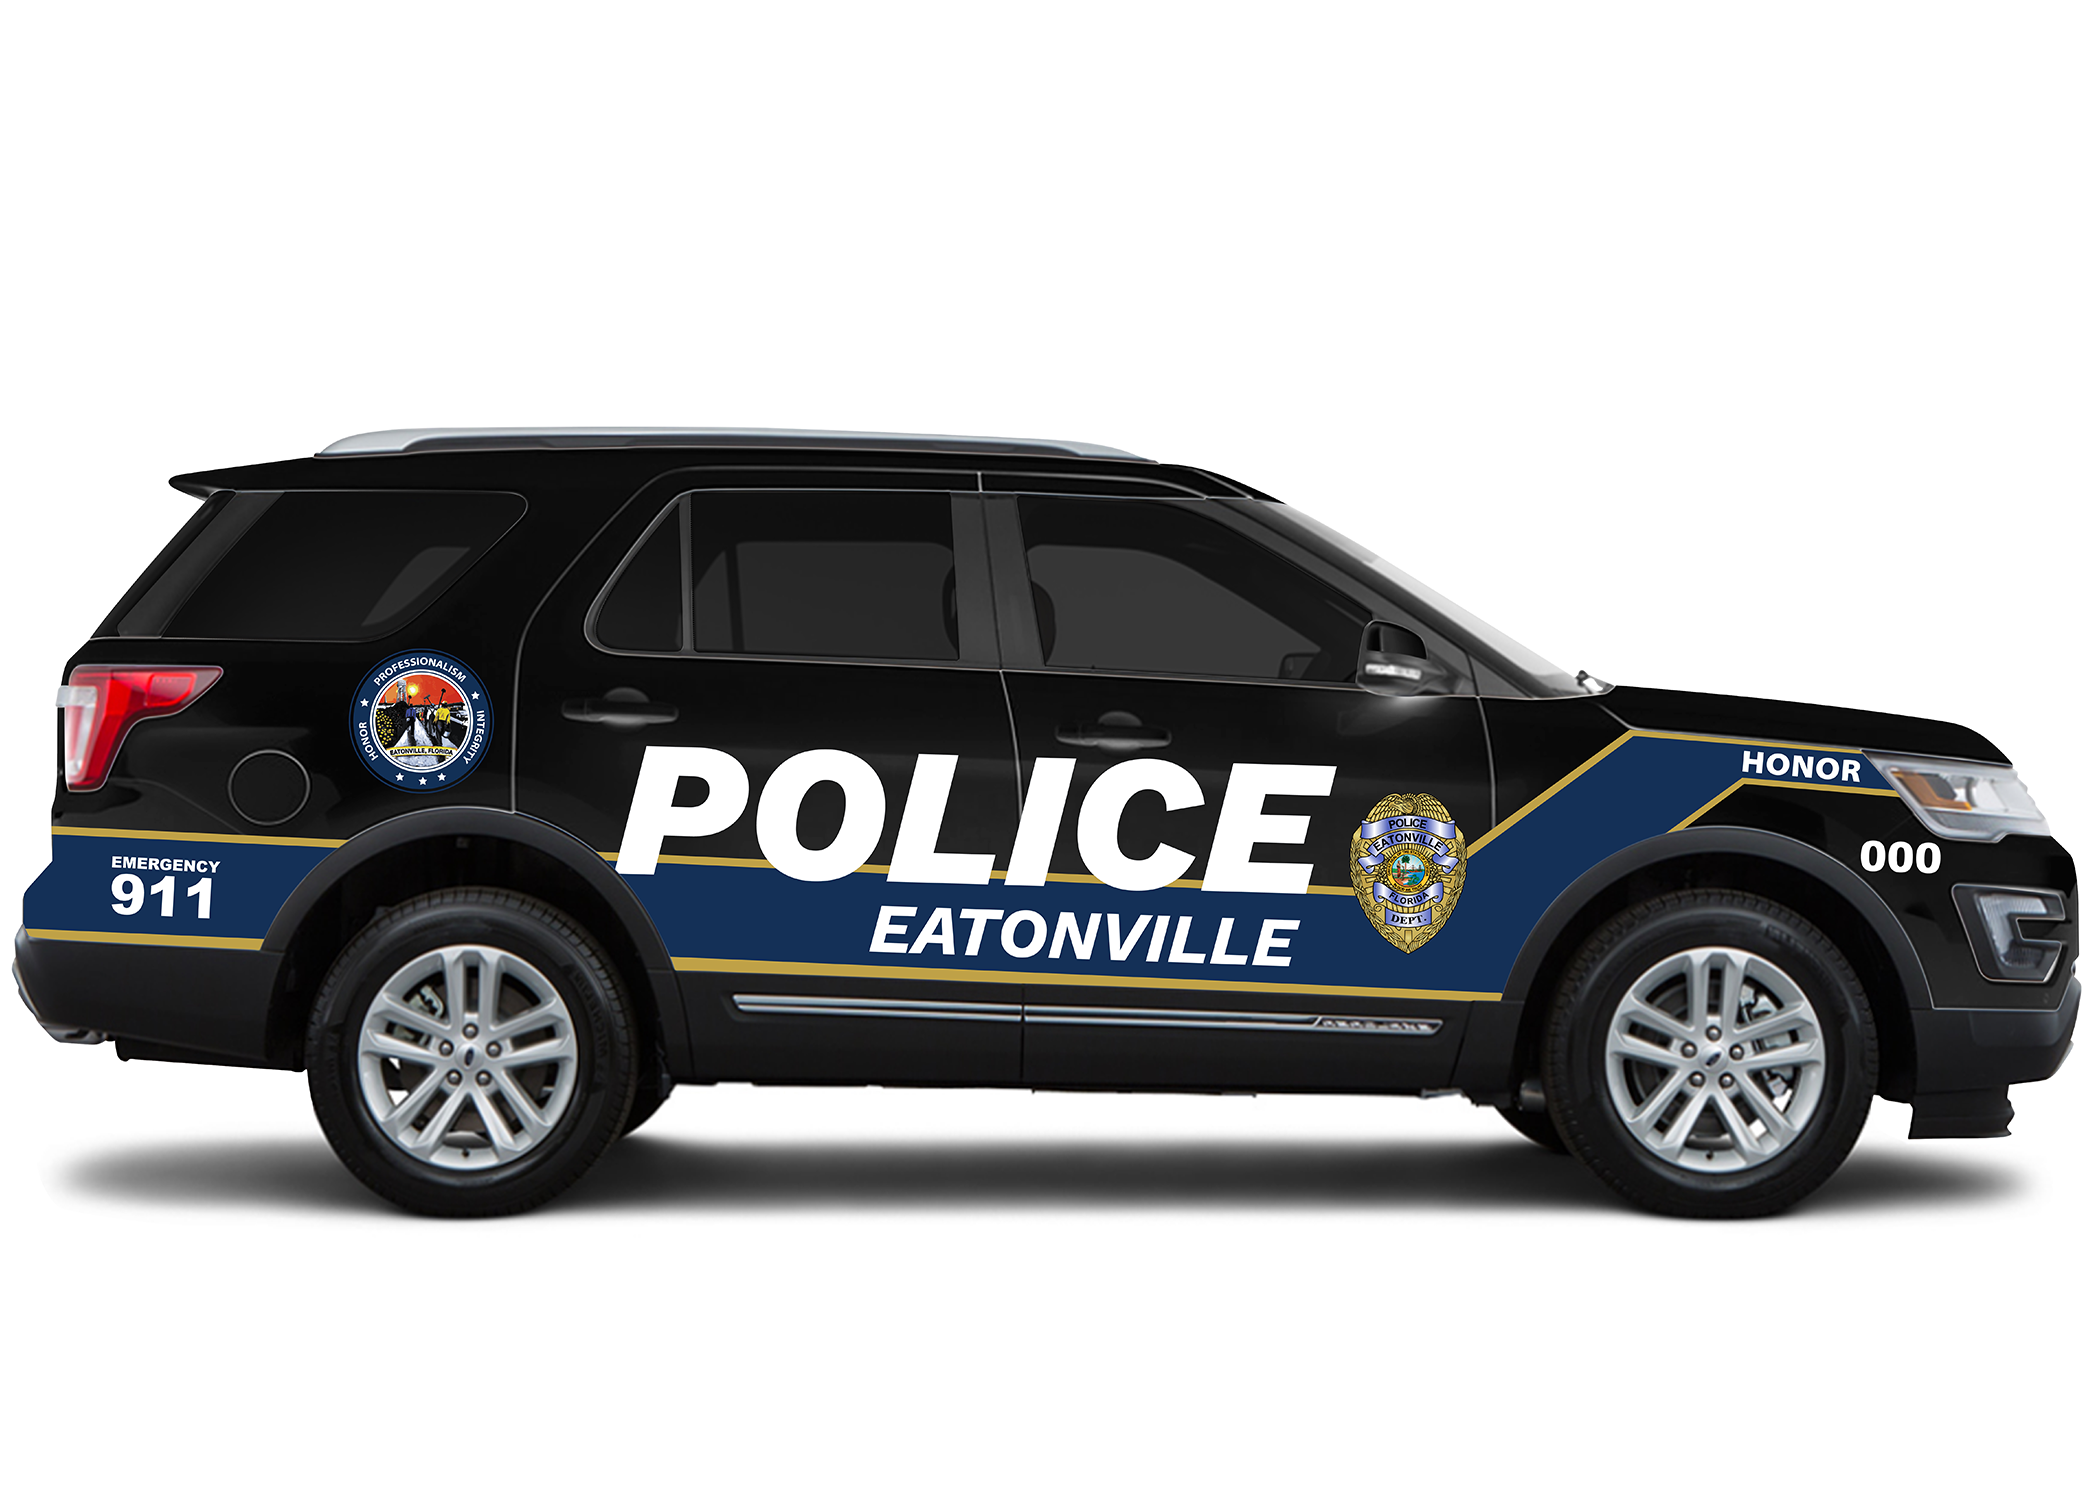 New Police Cars For Sale Upfitted with Emergency Lights, Vehicle